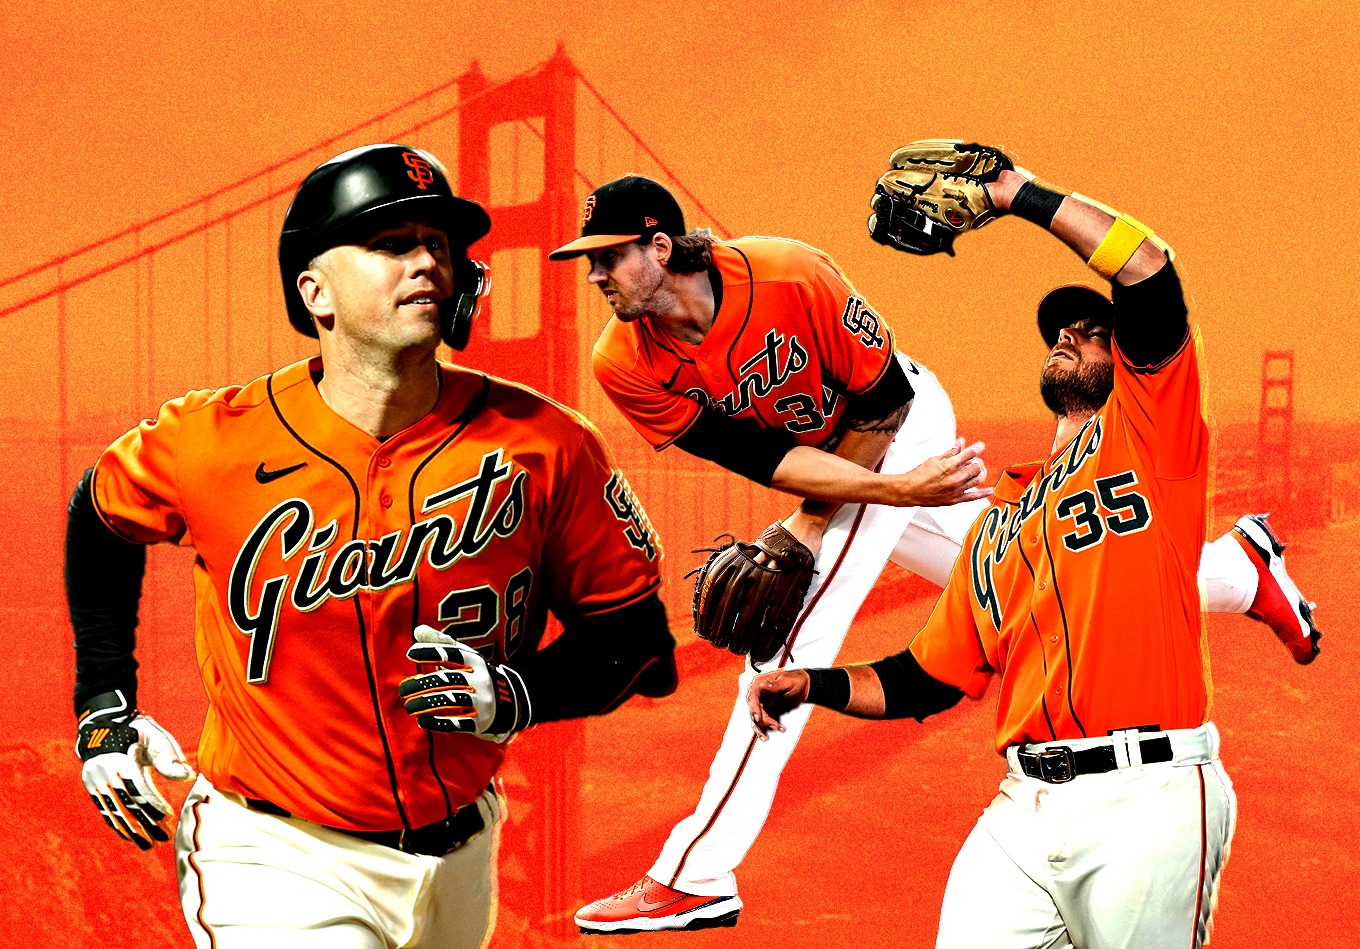 One Giant Leap? Why San Francisco’s Depth Sets the Team up for a Postseason Run